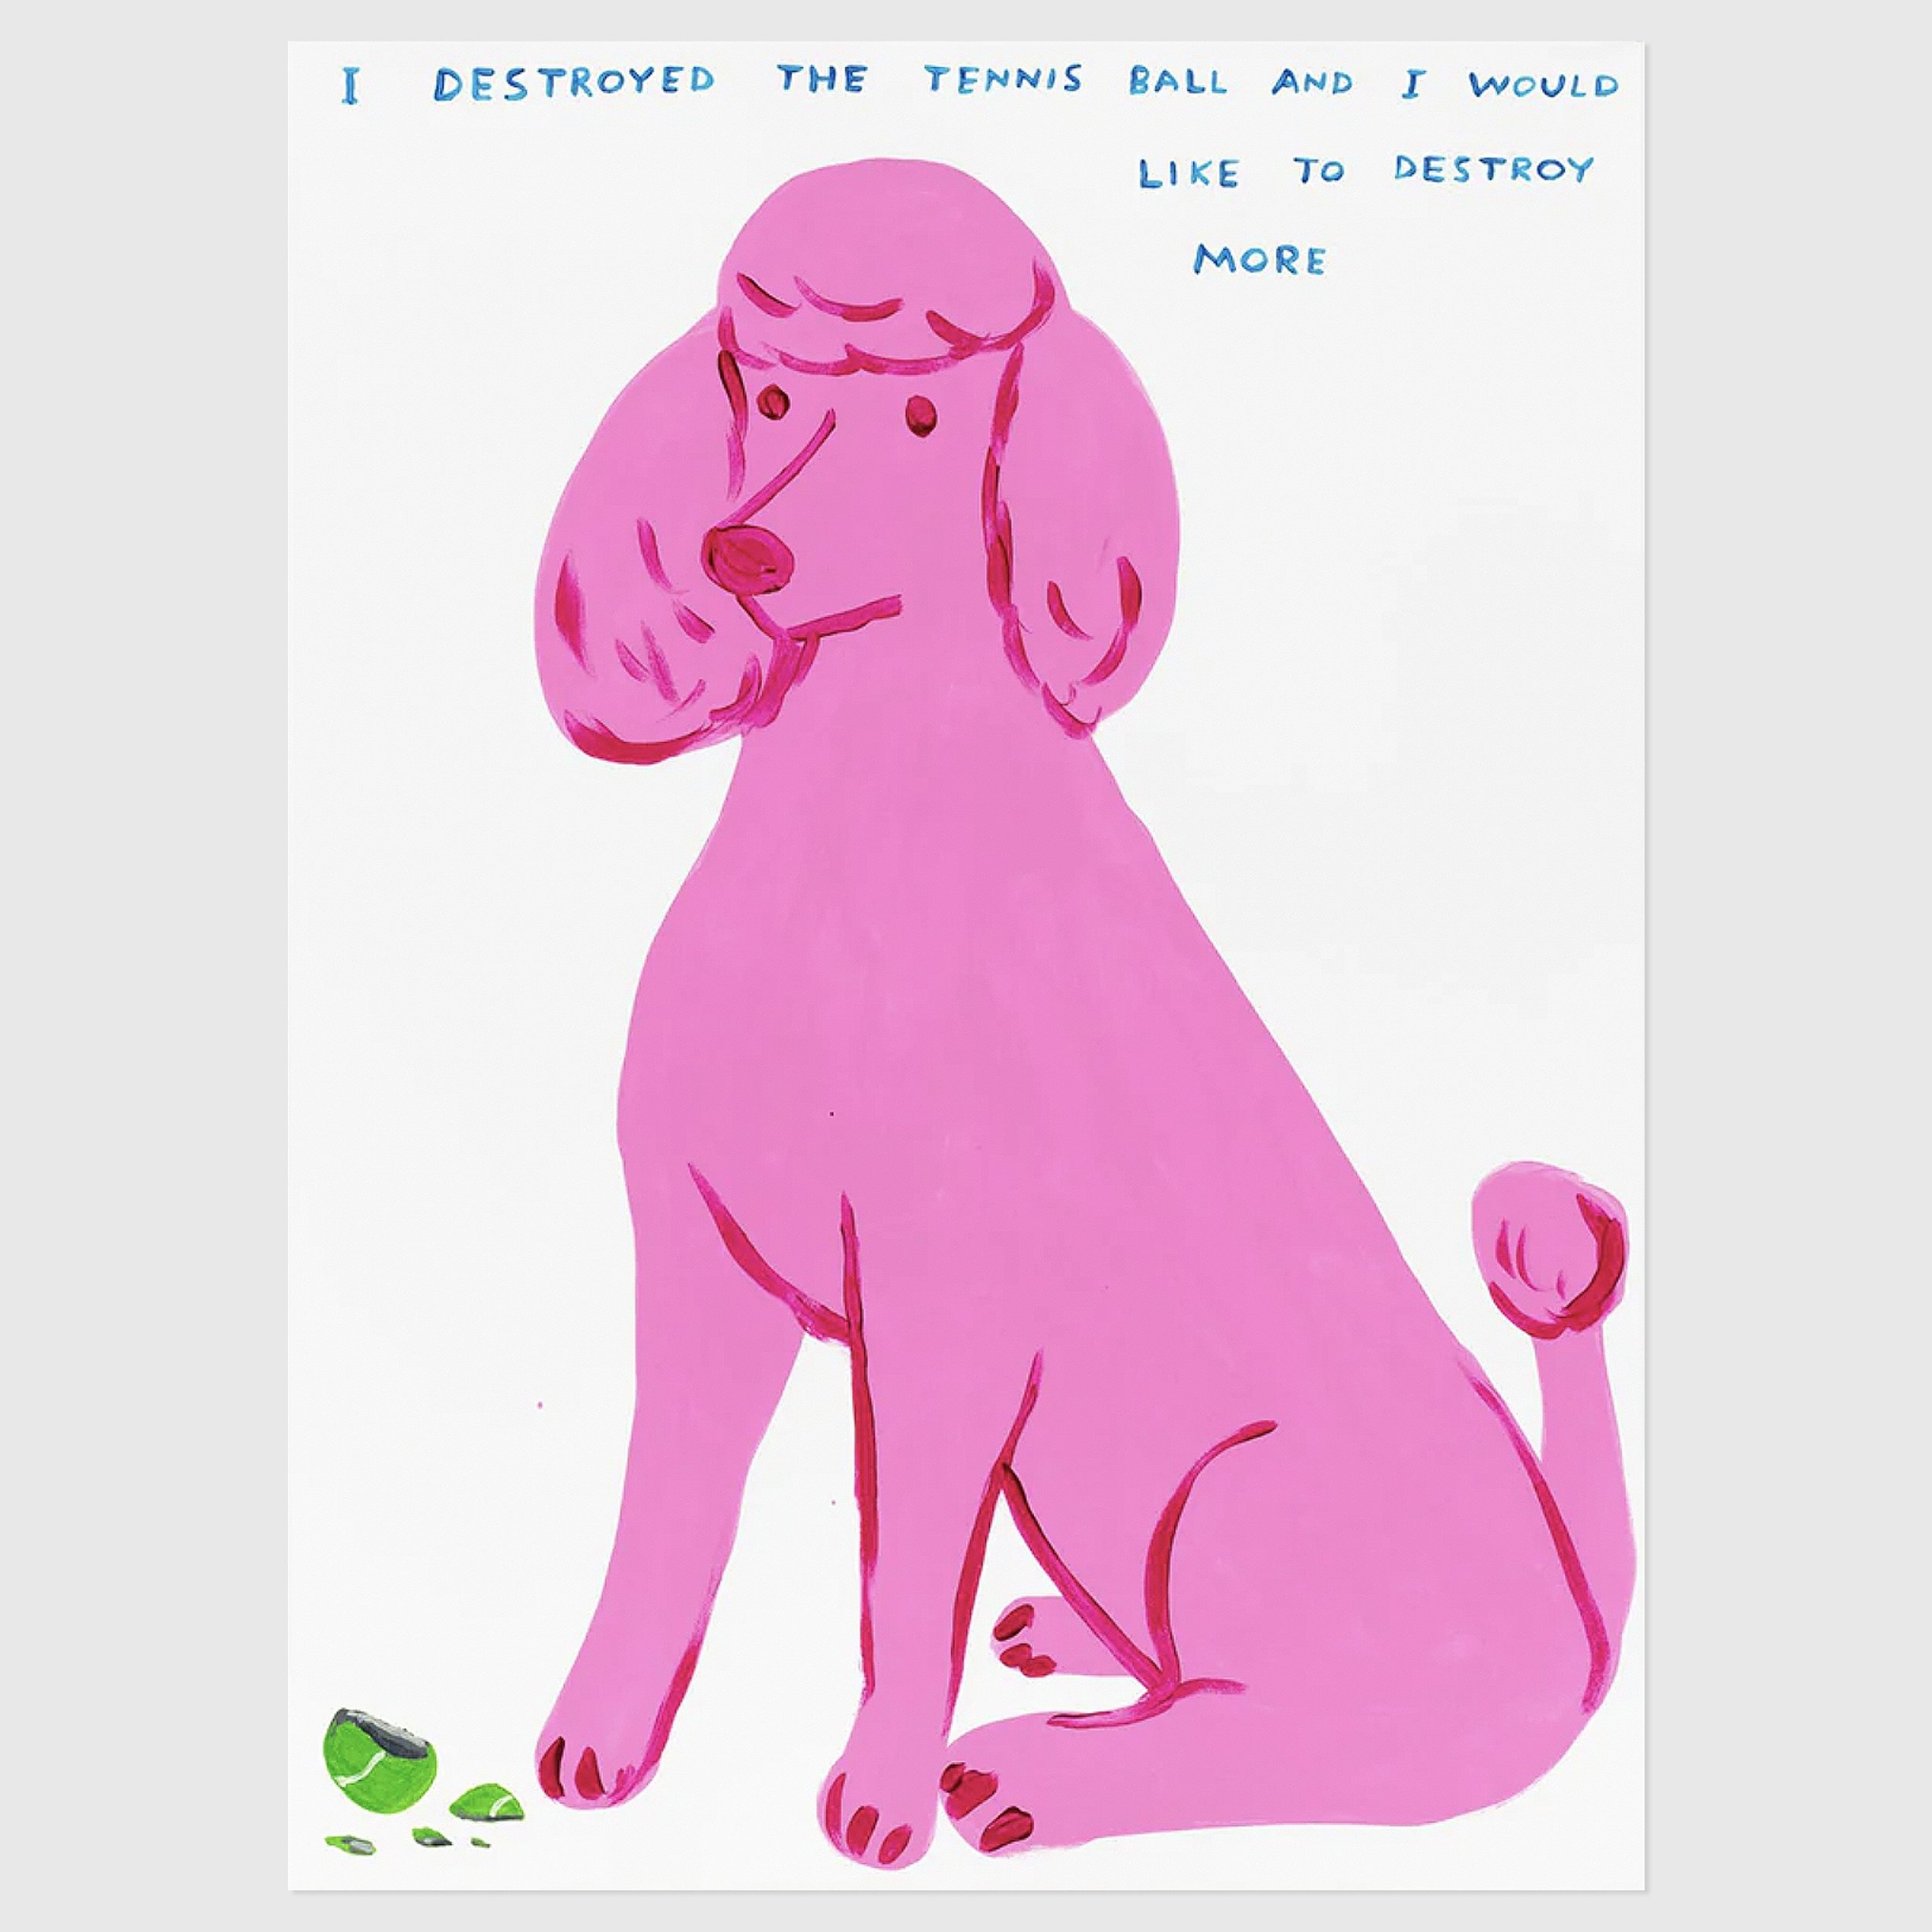 Featured in Best of British&hellip;

David Shrigley
&lsquo;I Destroyed The Tennis Ball&rsquo; (2023)
26 colour screen print on Somerset Satin Tub sized 410 gsm
75 x 56 cm
Signed by the artist
Edition of 125
&pound;2,750

A common theme across David S